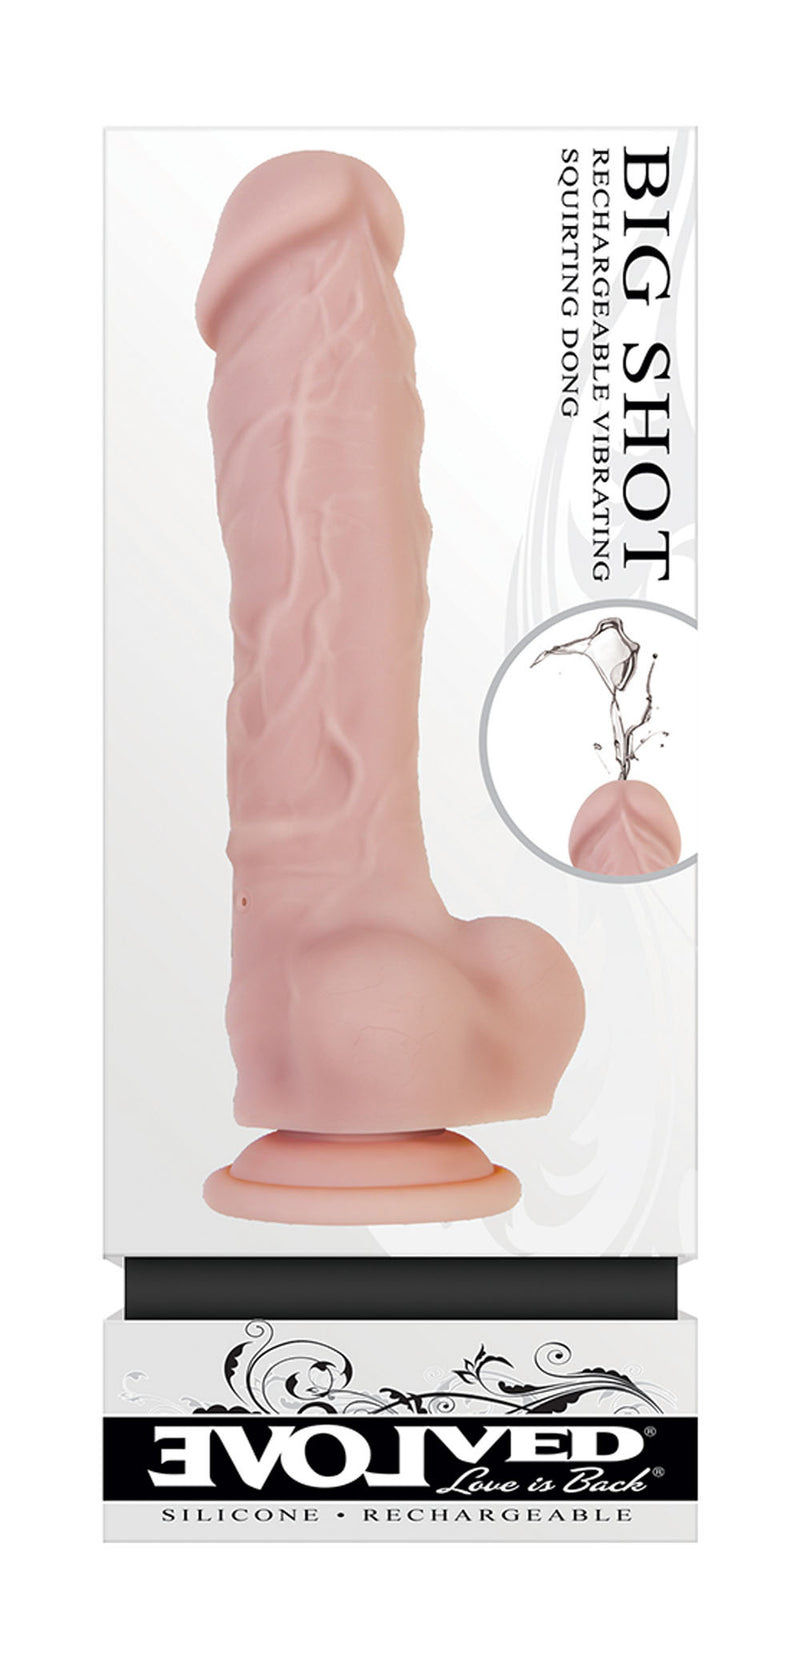 Realistic Squirting Multispeed Vibrator with 10 Functions & Sturdy Suction Cup Base - Rechargeable, Waterproof, & Phthalate-Free!